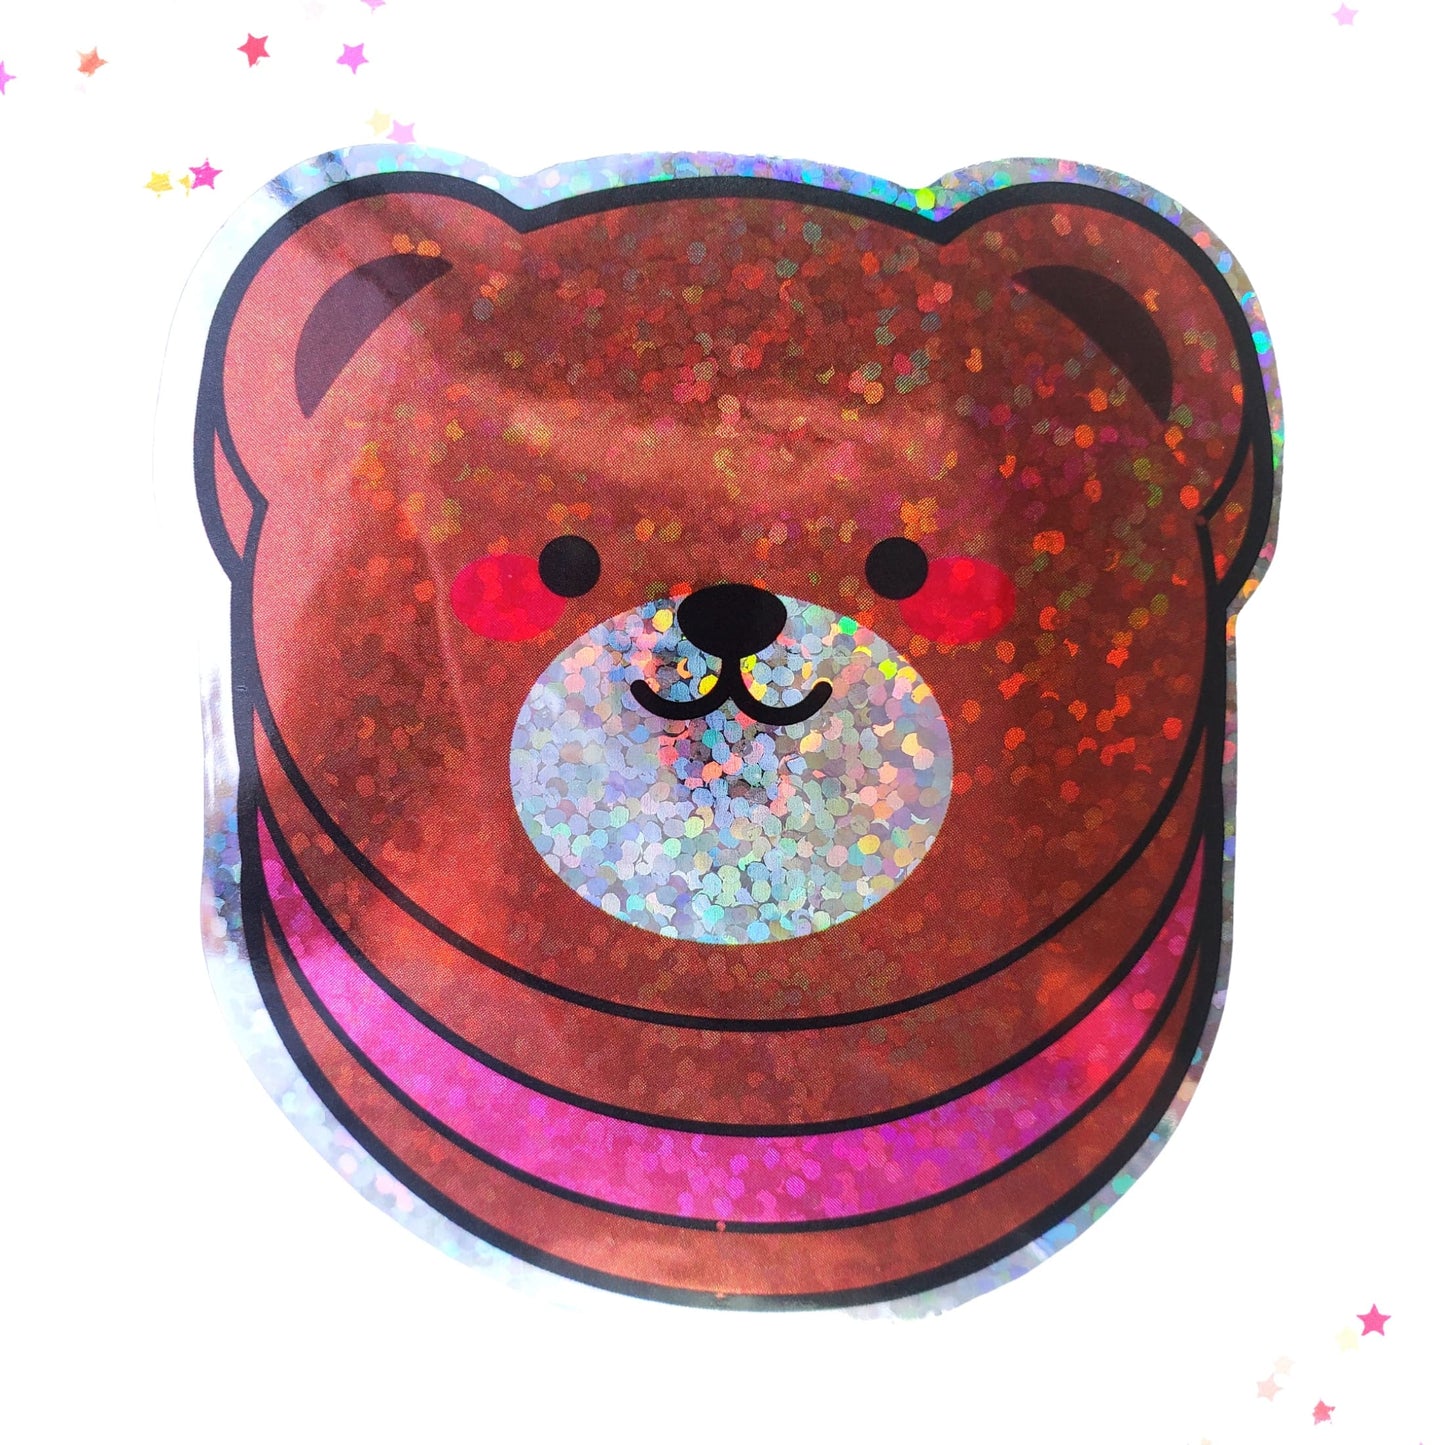 Premium Sticker - Sparkly Holographic Glitter Bear Ice Cream Sandwich from Confetti Kitty, Only 2.00